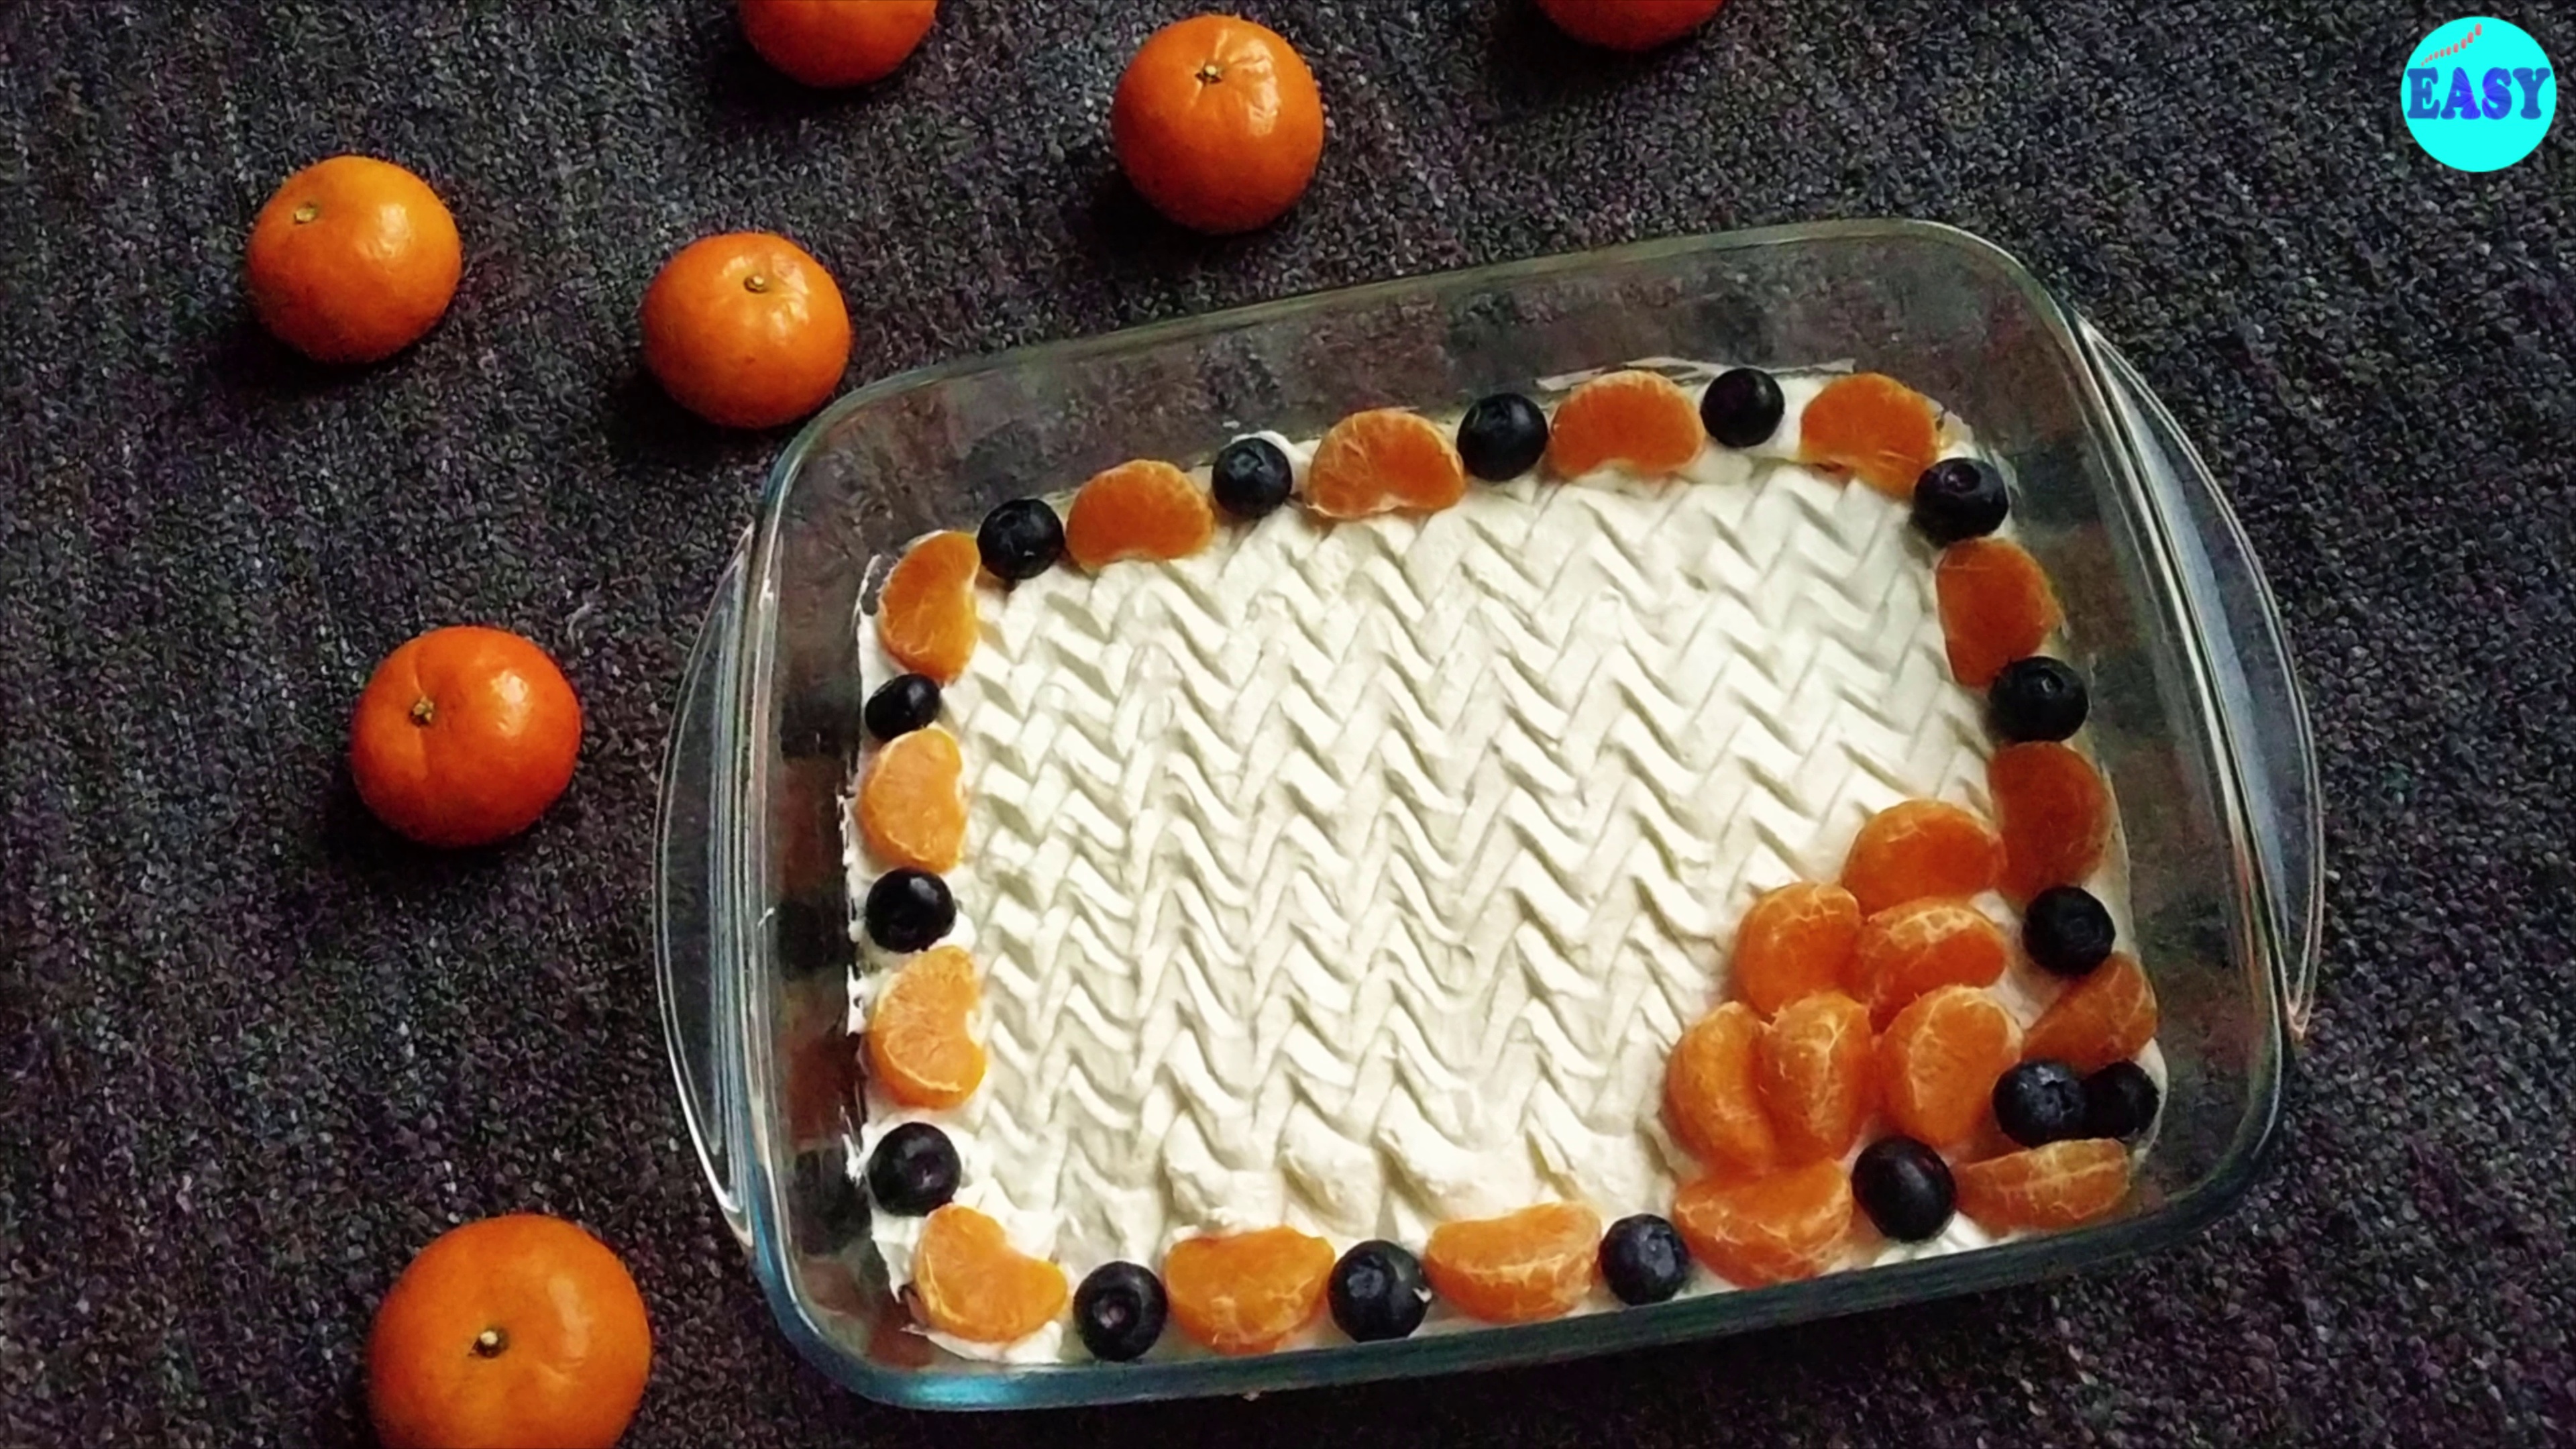 Step 10 - Spread some whipped cream on top and decorate with some fresh orange slices and blueberries.